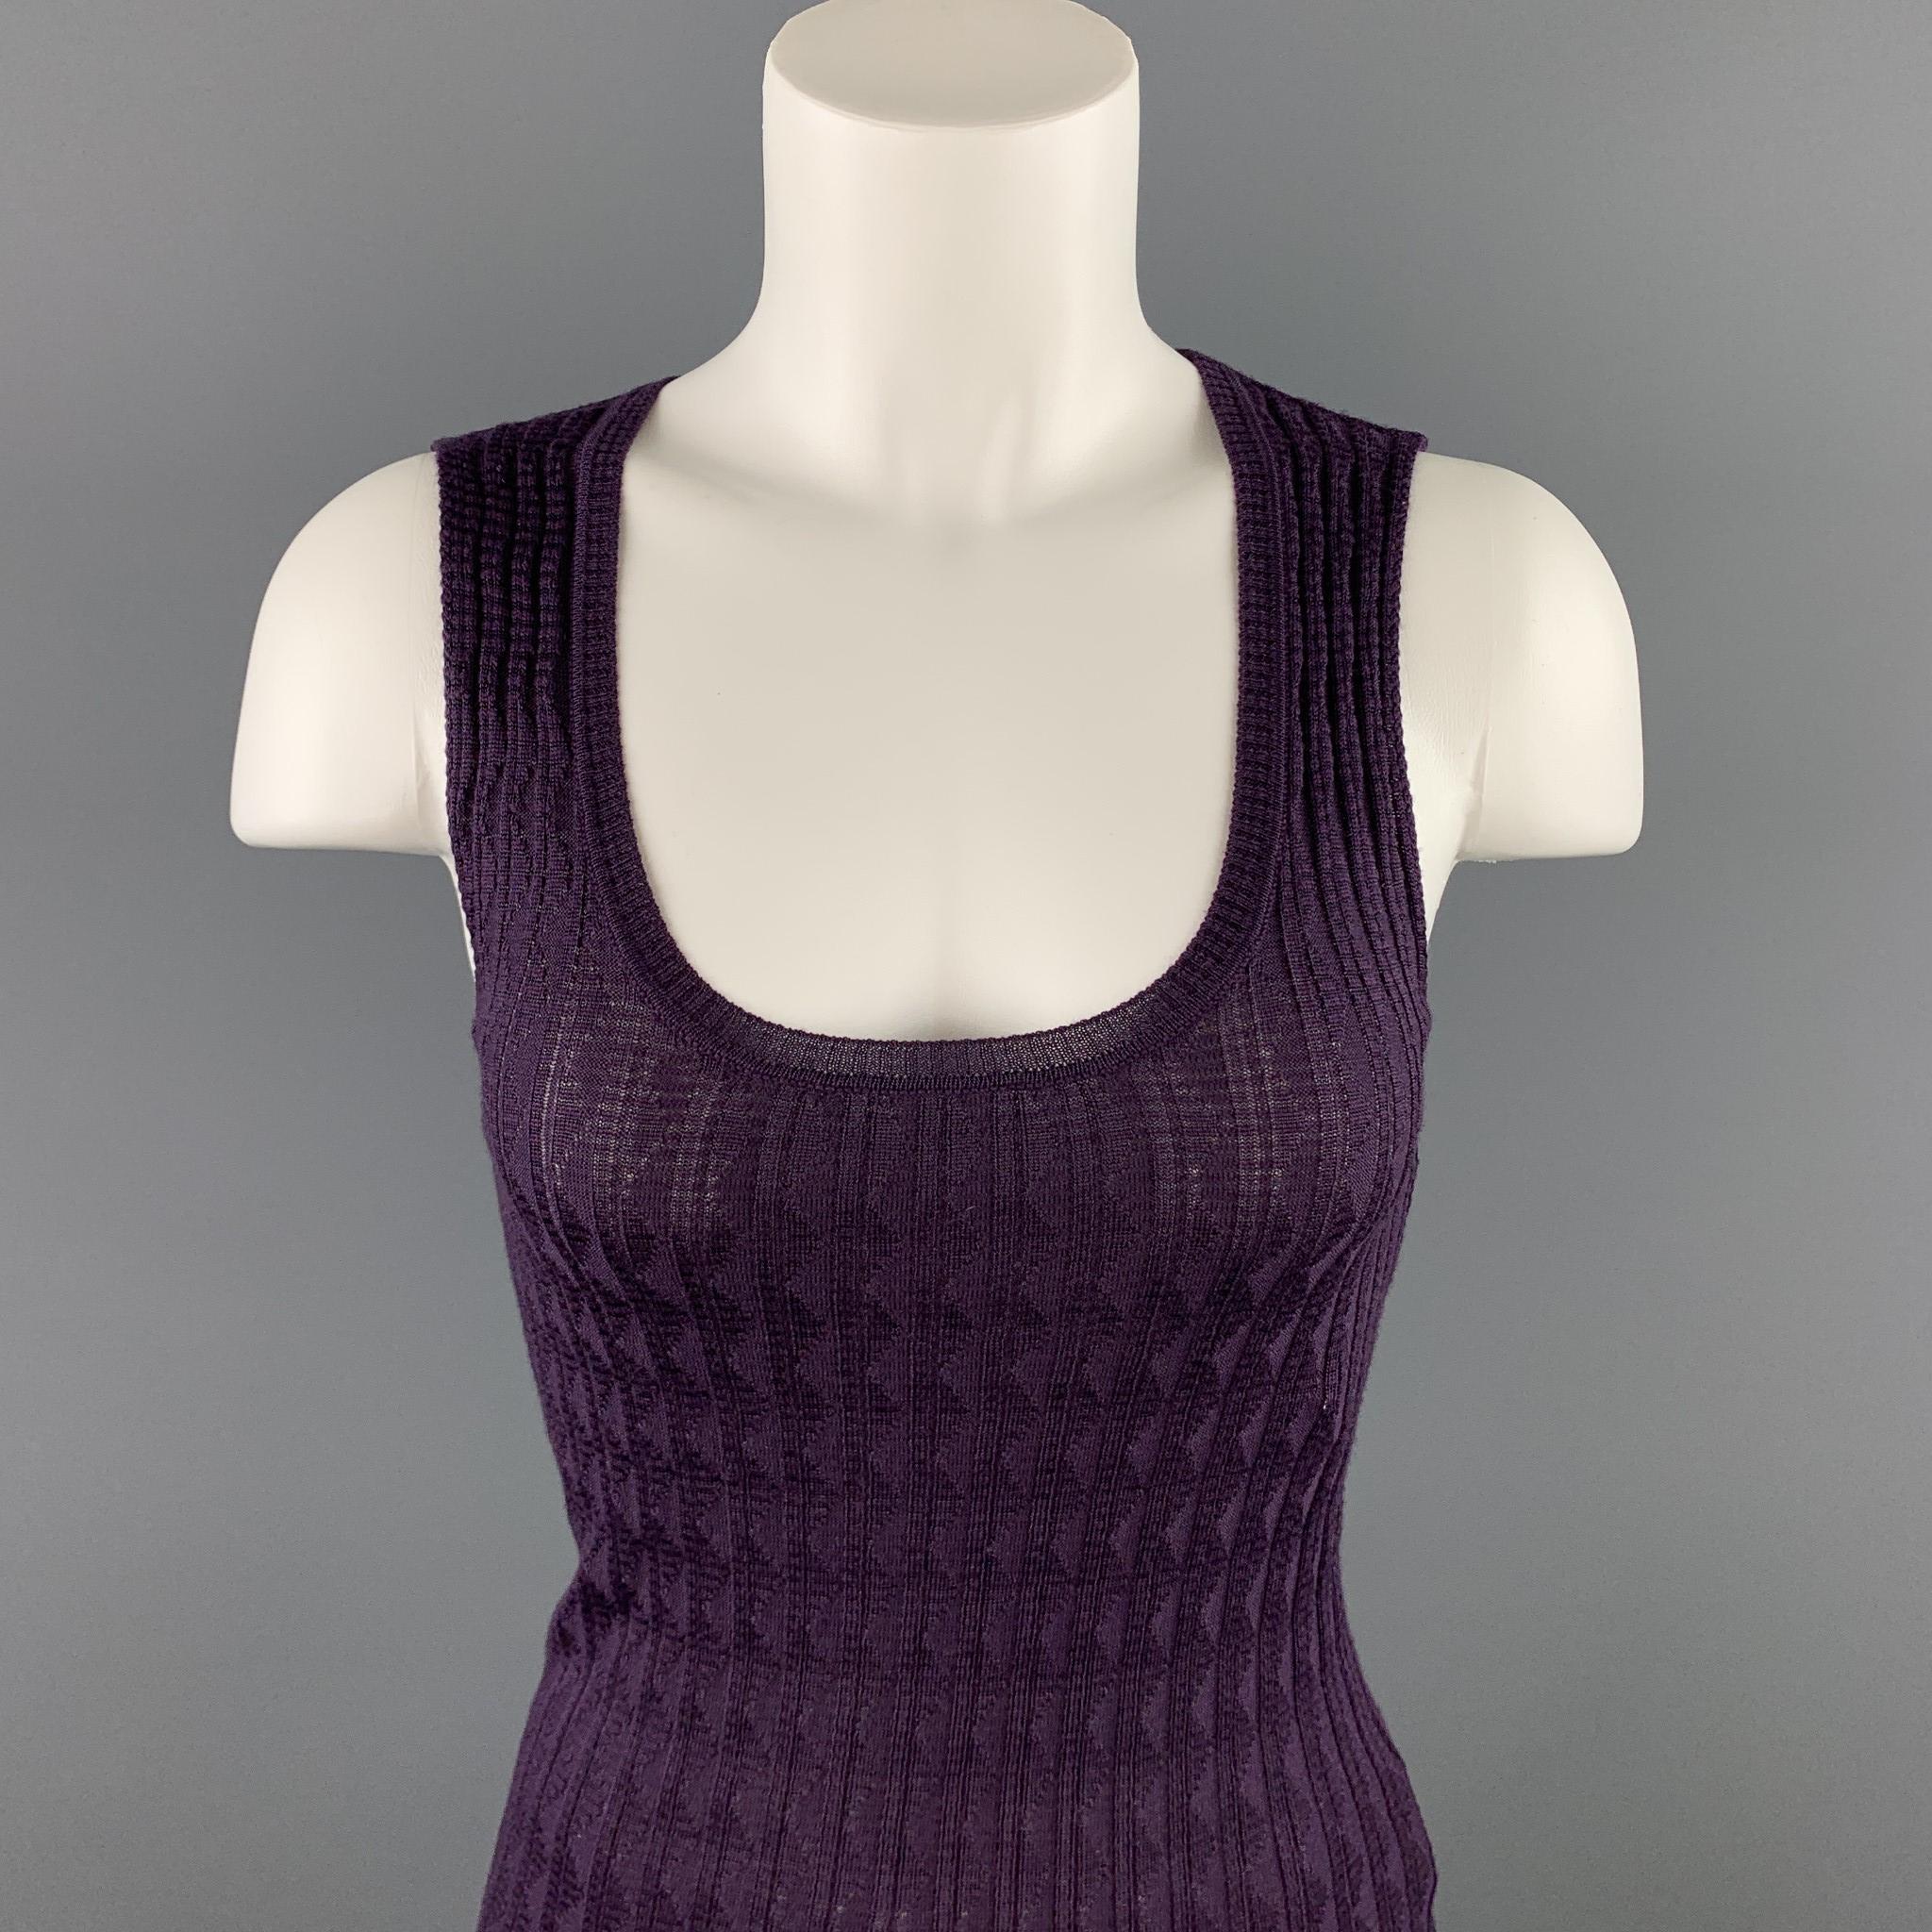 M MISSONI sleeveless top comes in purple knitted textured wool / viscose featuring a scoop neck.

Very Good Pre-Owned Condition.
Marked: I 38, GB 6, USA 2

Measurements:

Shoulder: 12.5 in. 
Bust: 24 in. 
Length: 24 in. 

SKU: 91648
Category: Casual